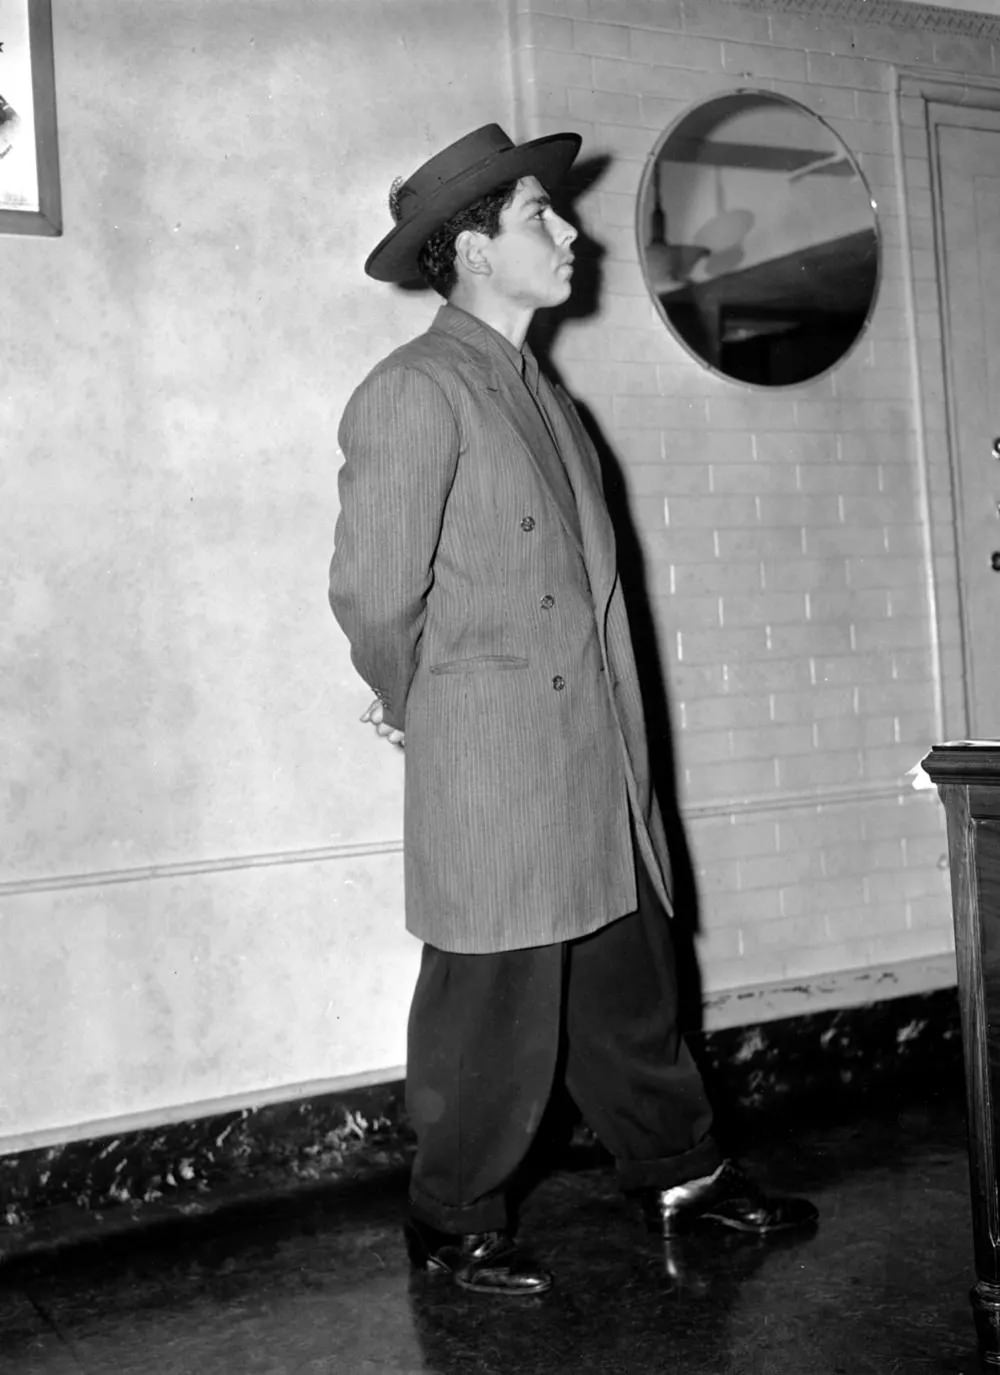 A man arrested during the Zoot Suit Riots models a zoot suit and pancake hat in a Los Angeles County jail on June 9, 1943.